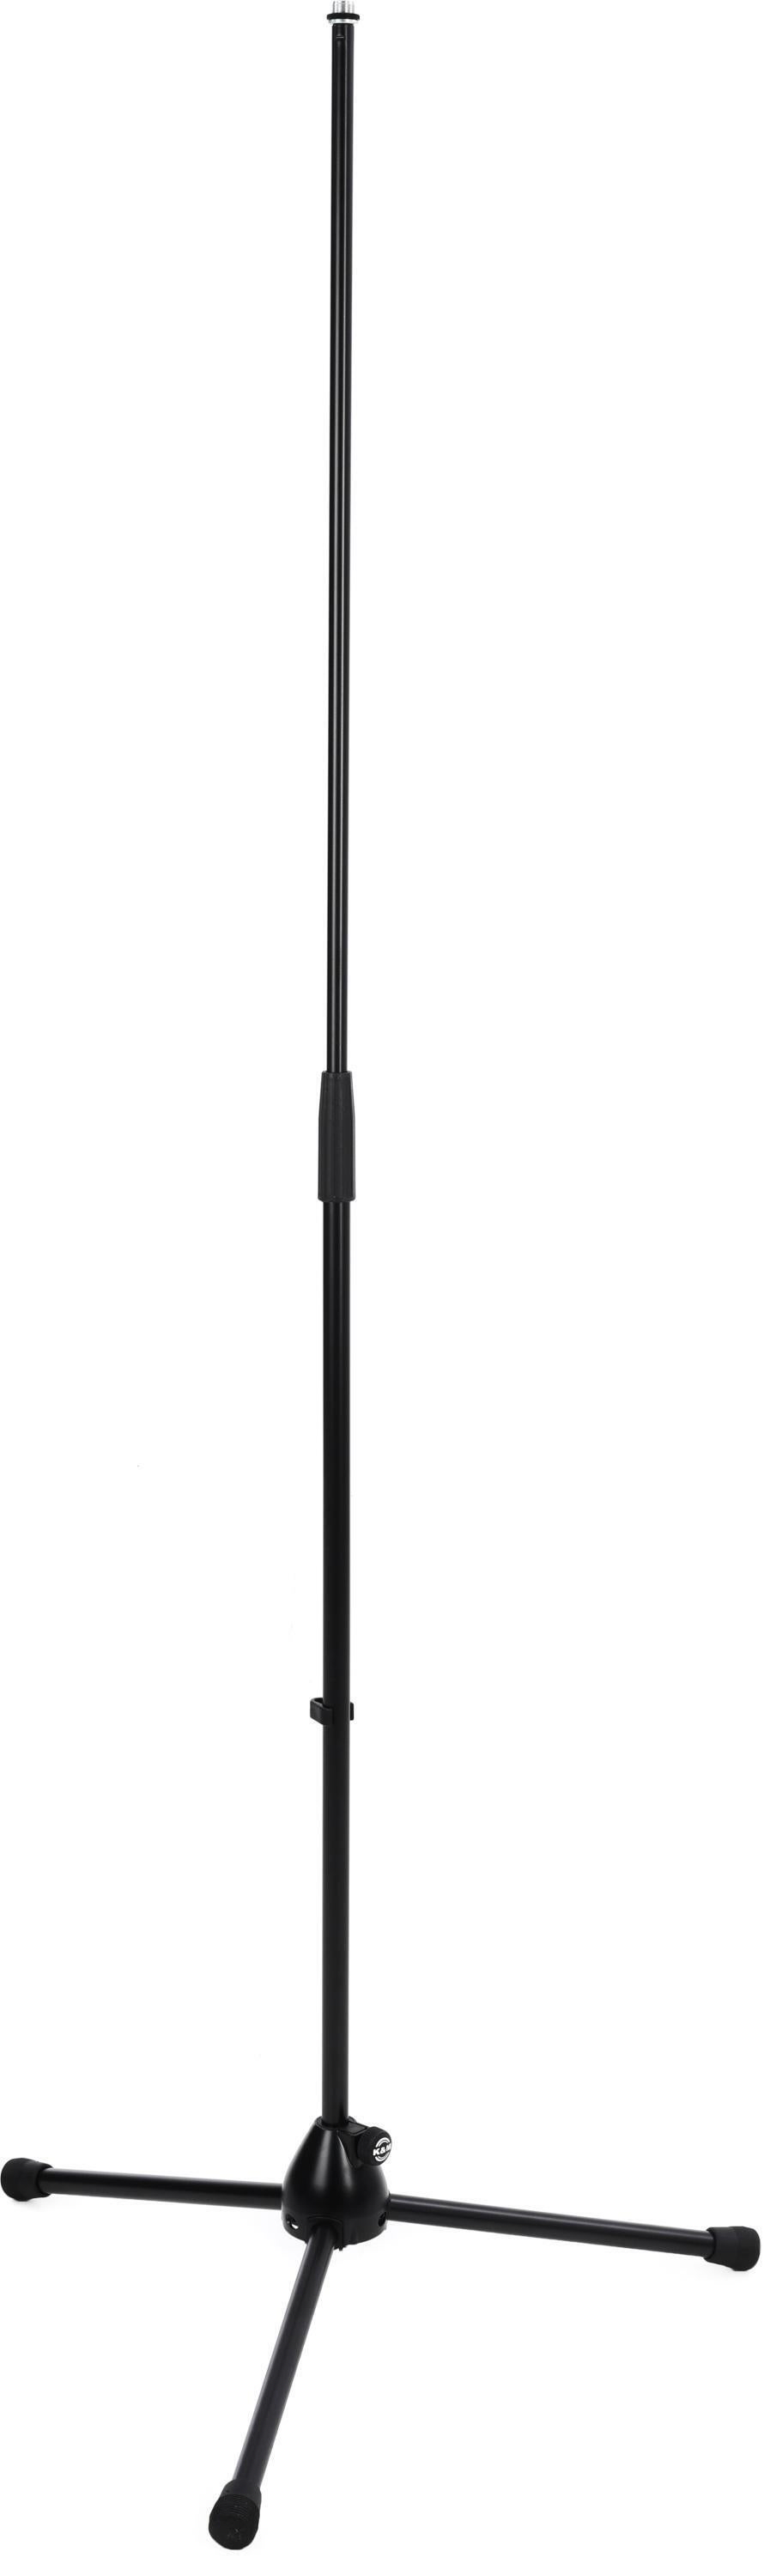 K&M 201A/2 Microphone Stand - Black | Sweetwater